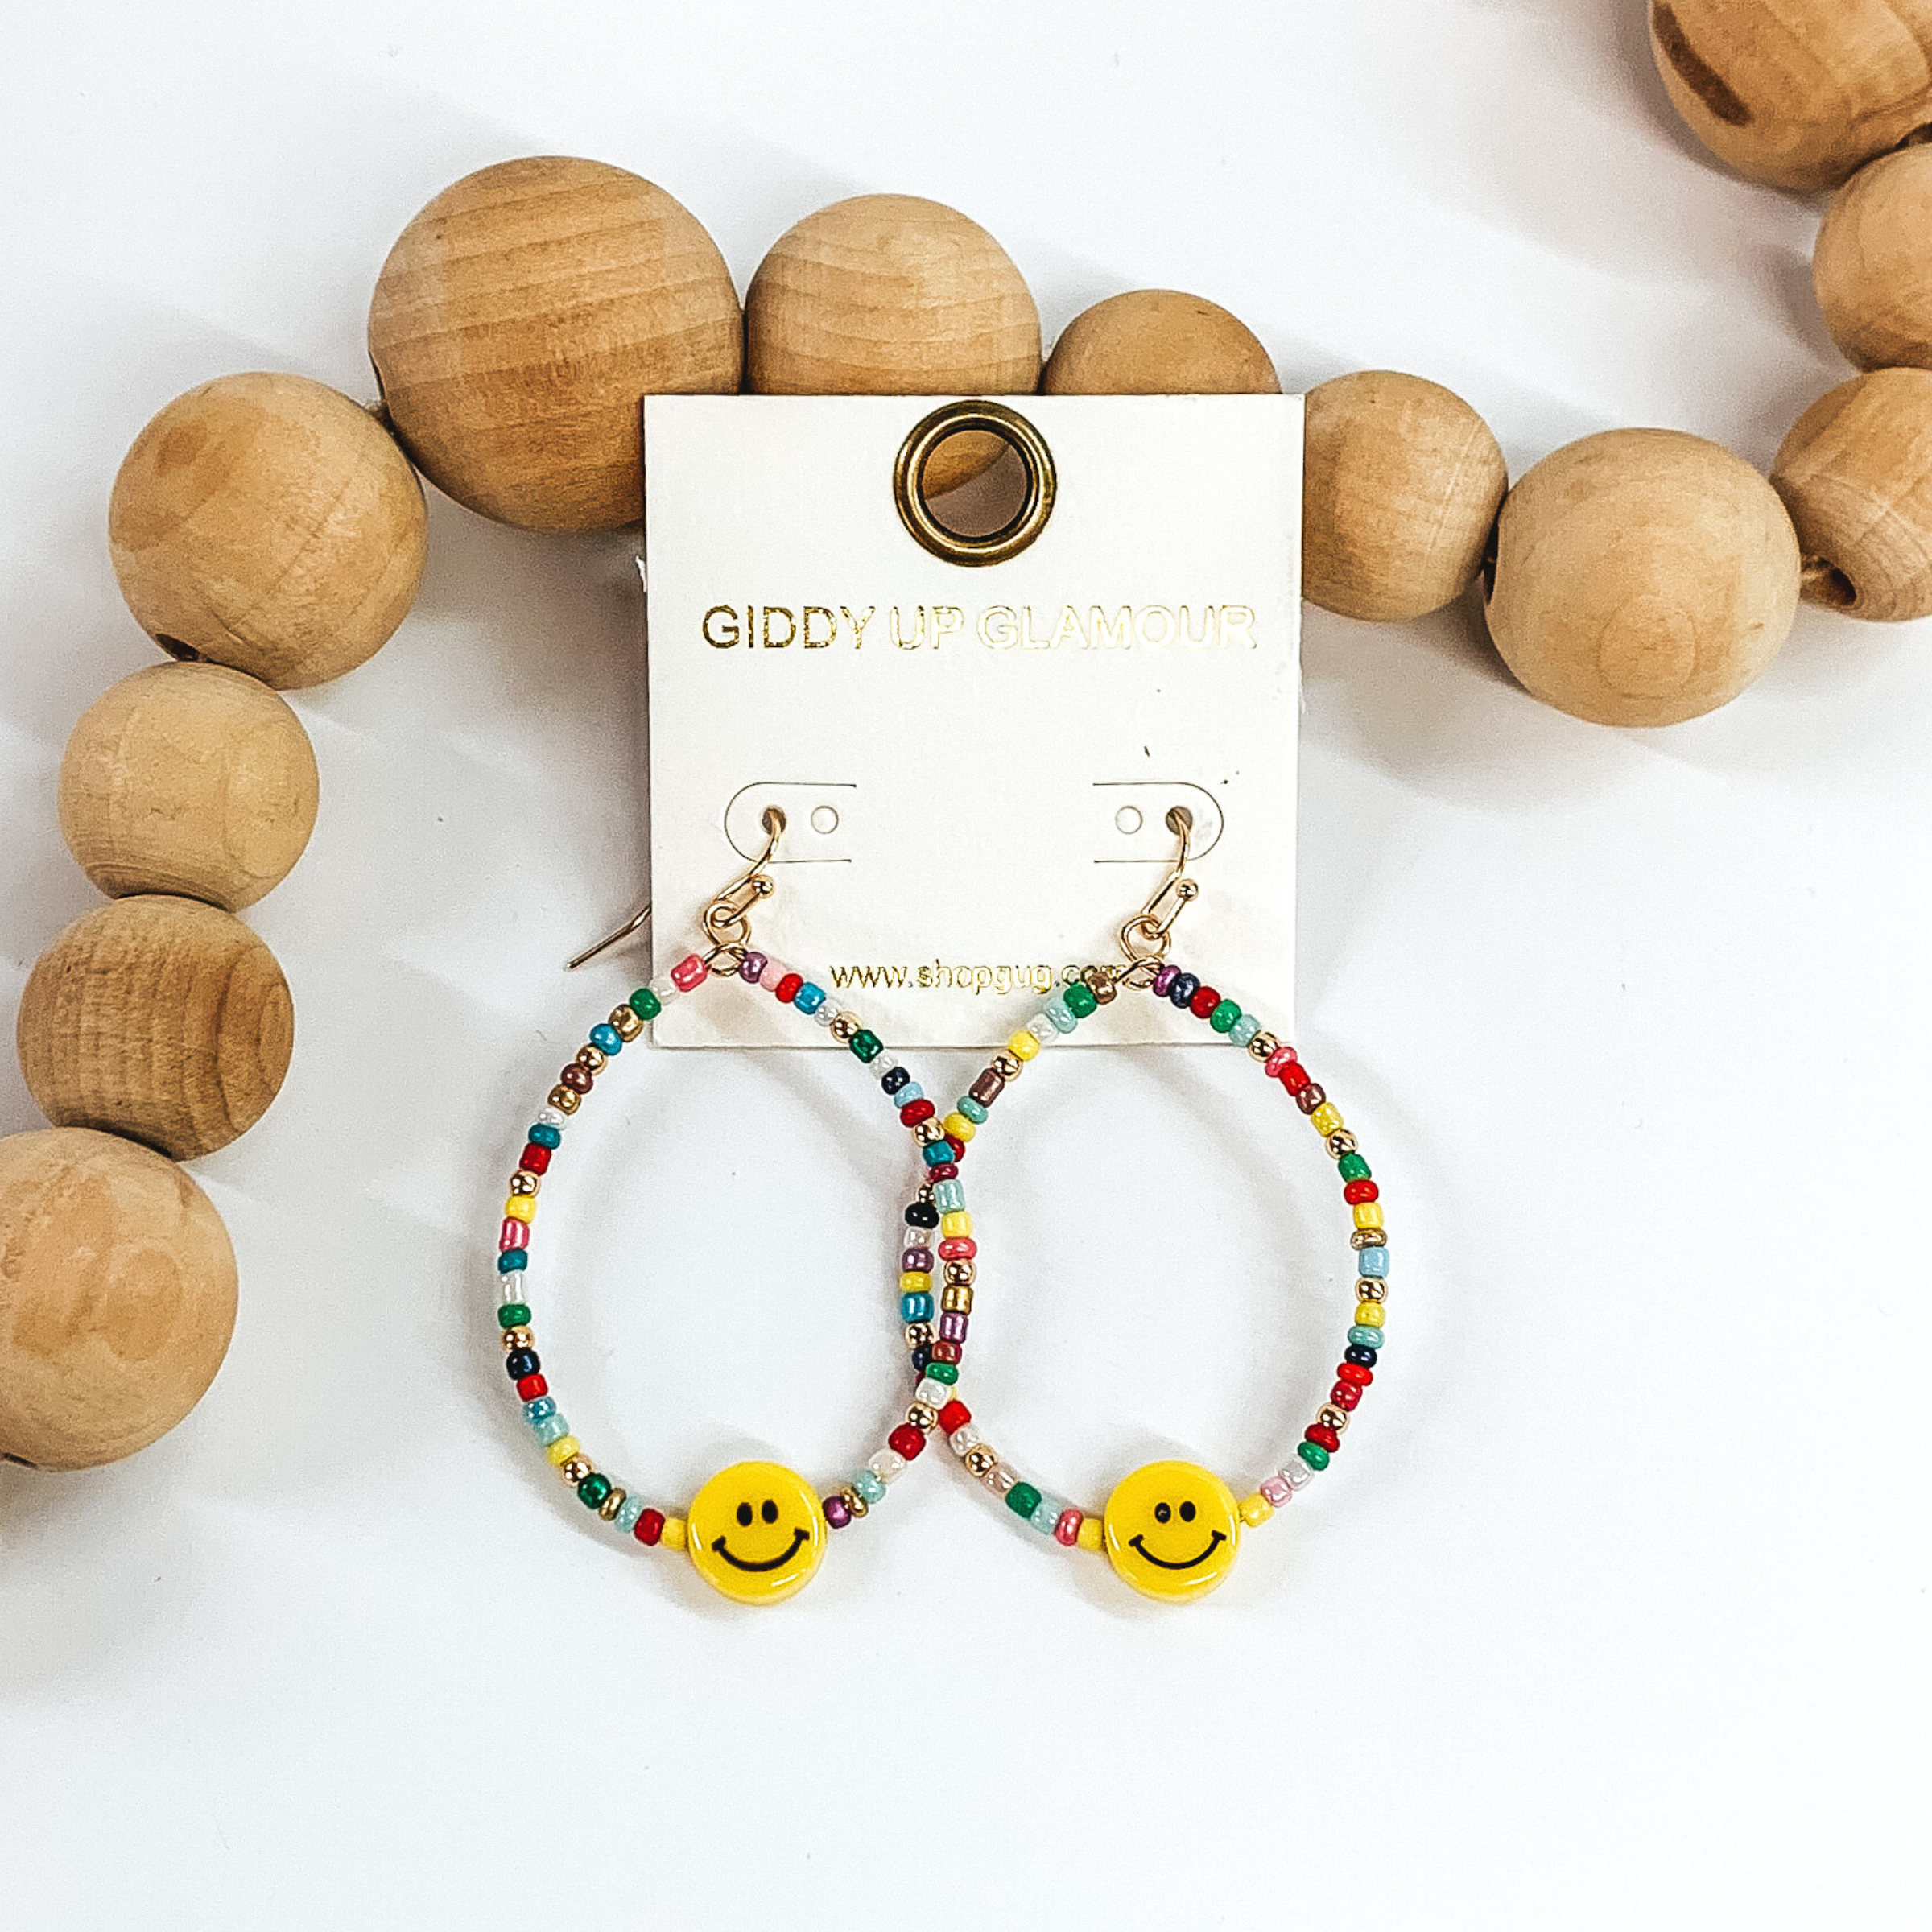 Hanging teardrop earrings with hanging yellow smiley faces. These earrings are covered in multicolored beads with gold spacers. These earrings are pictured laying next to some tan beads on a white background.